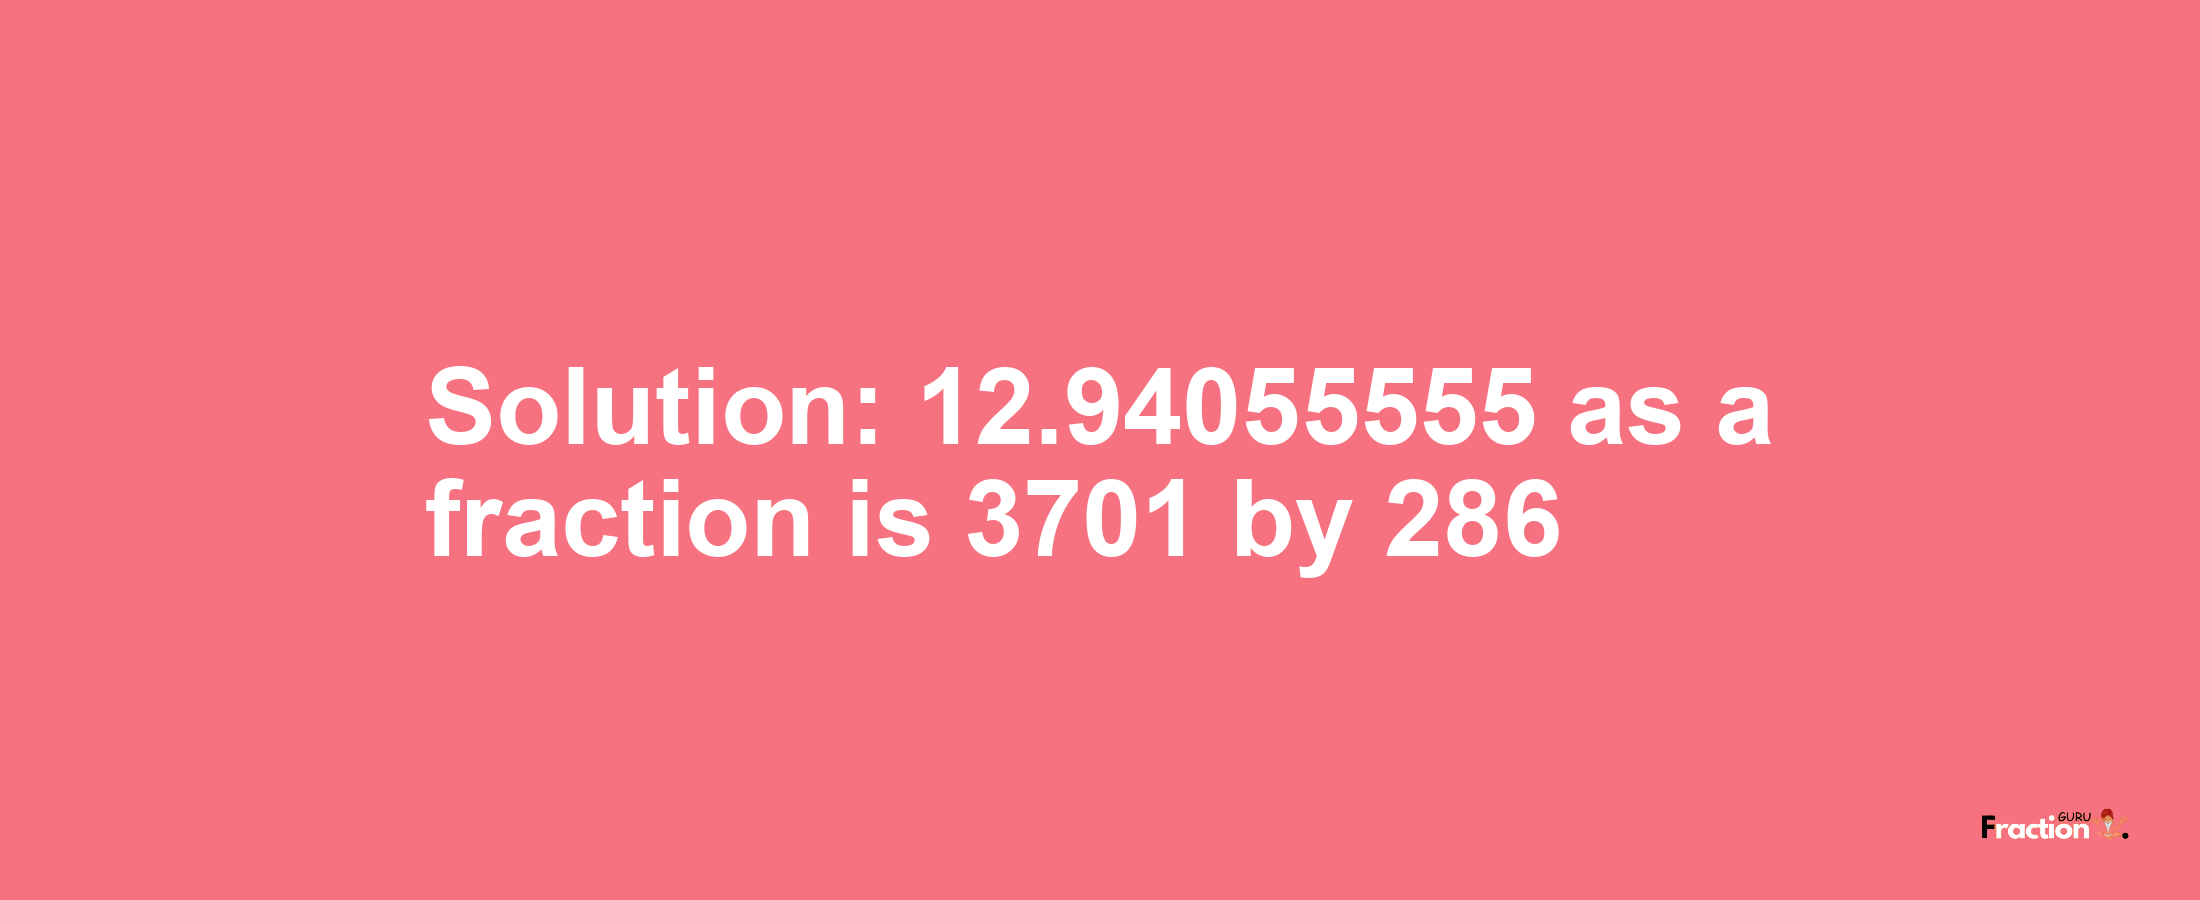 Solution:12.94055555 as a fraction is 3701/286